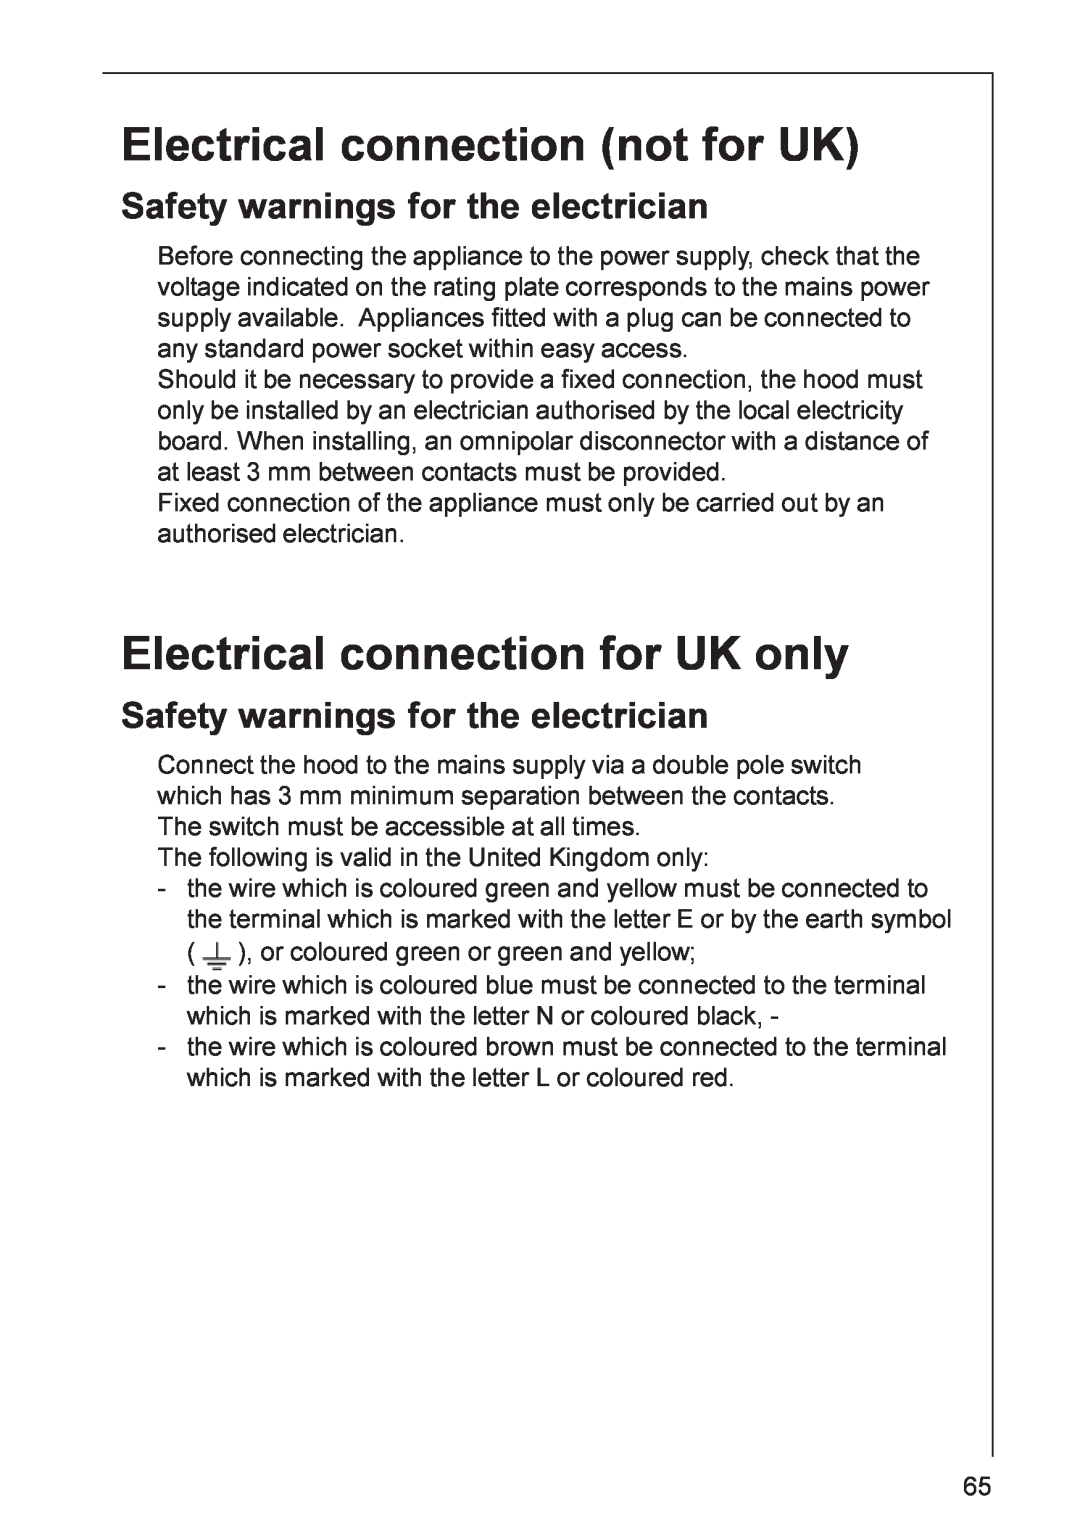 Electrolux HD 8820, HD 8890, DD 8820 Electrical connection not for UK, Electrical connection for UK only 